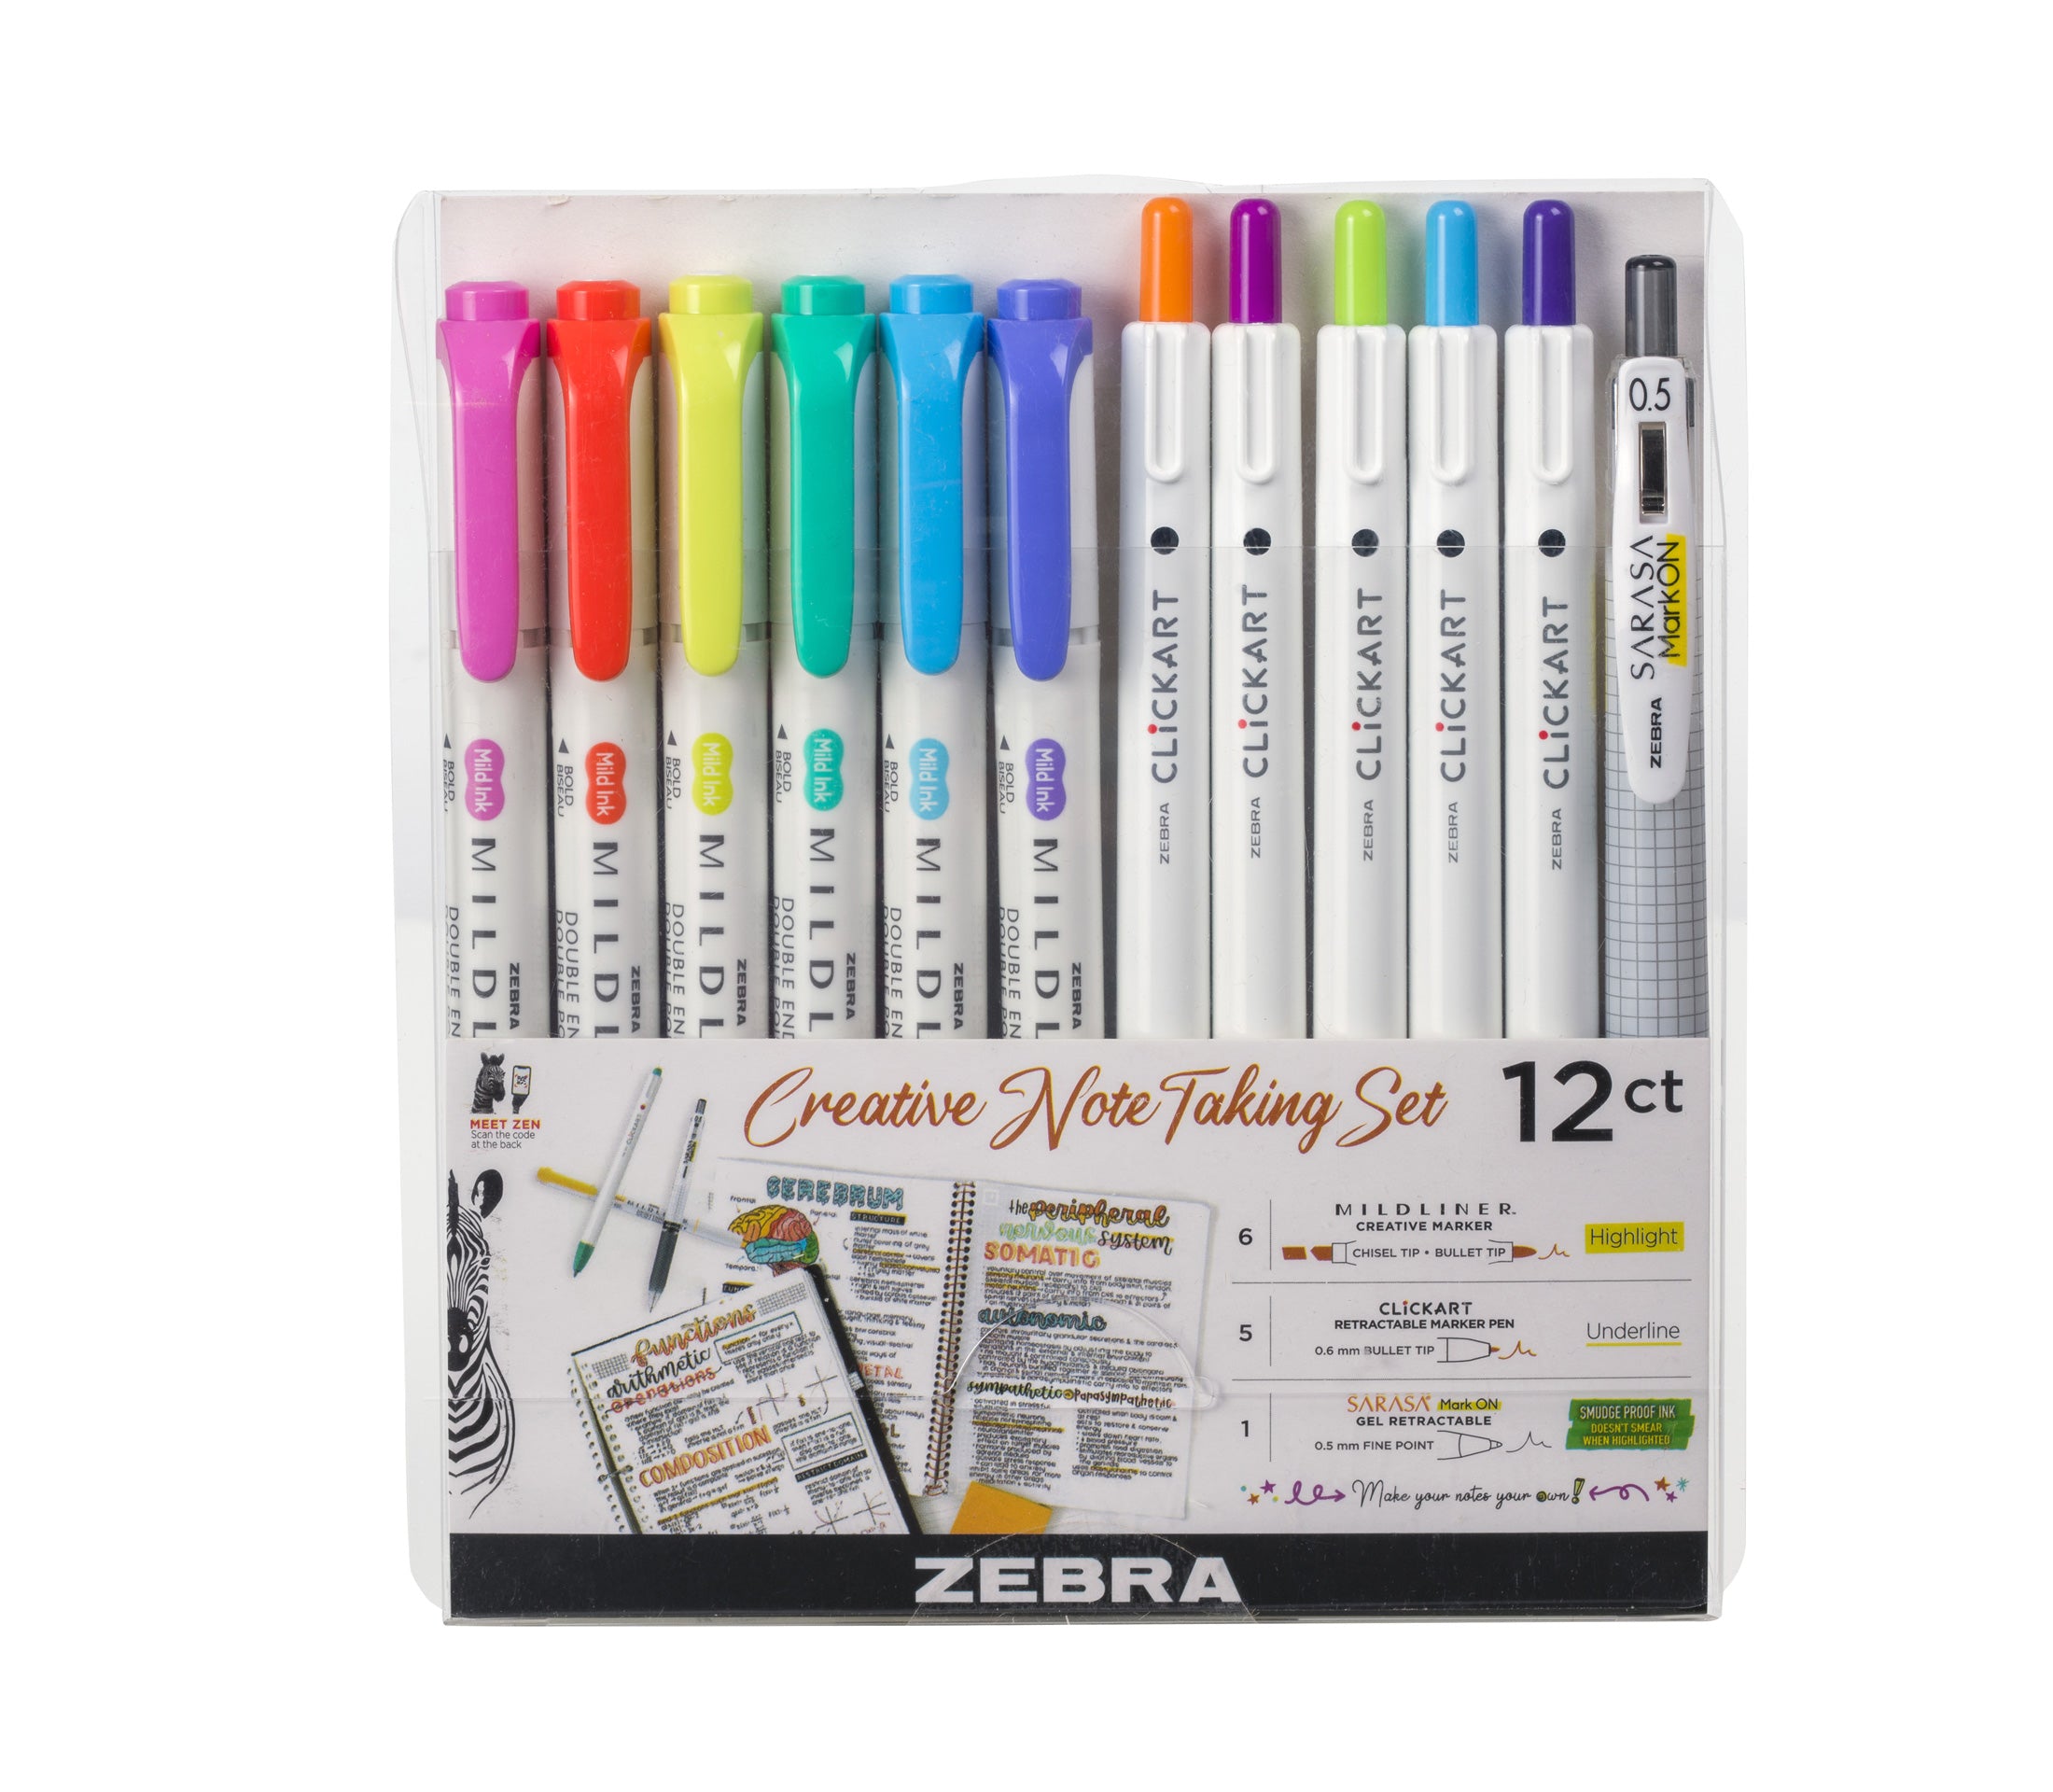 Zebra Besties Lettering Brush and Marker Exclusive 16 Piece Set, Includes 1  Each Black Brush Pen in Extra Fine, Fine and Medium Tips, 3 Metallic Brush